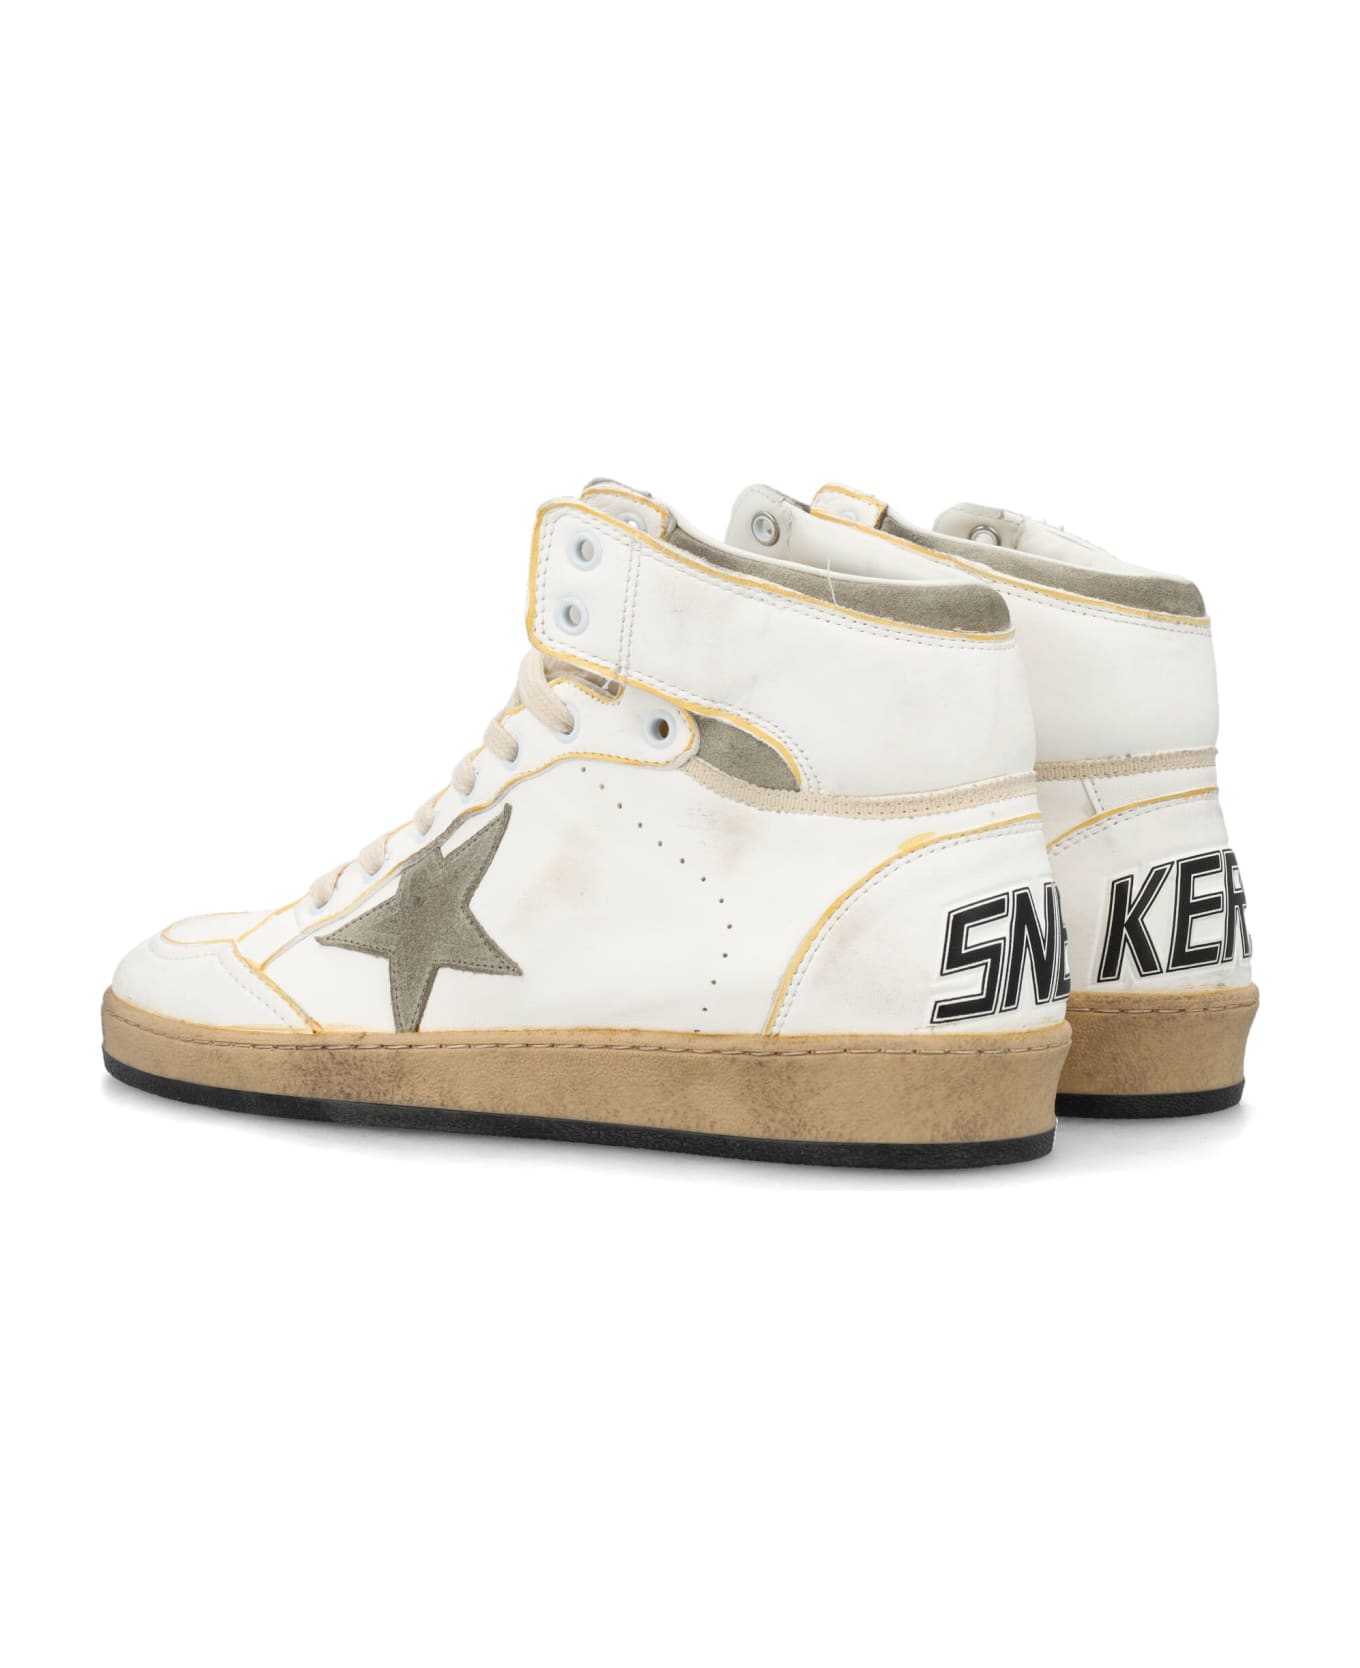 Golden Goose Sky Star Sneakers - White/Taupe